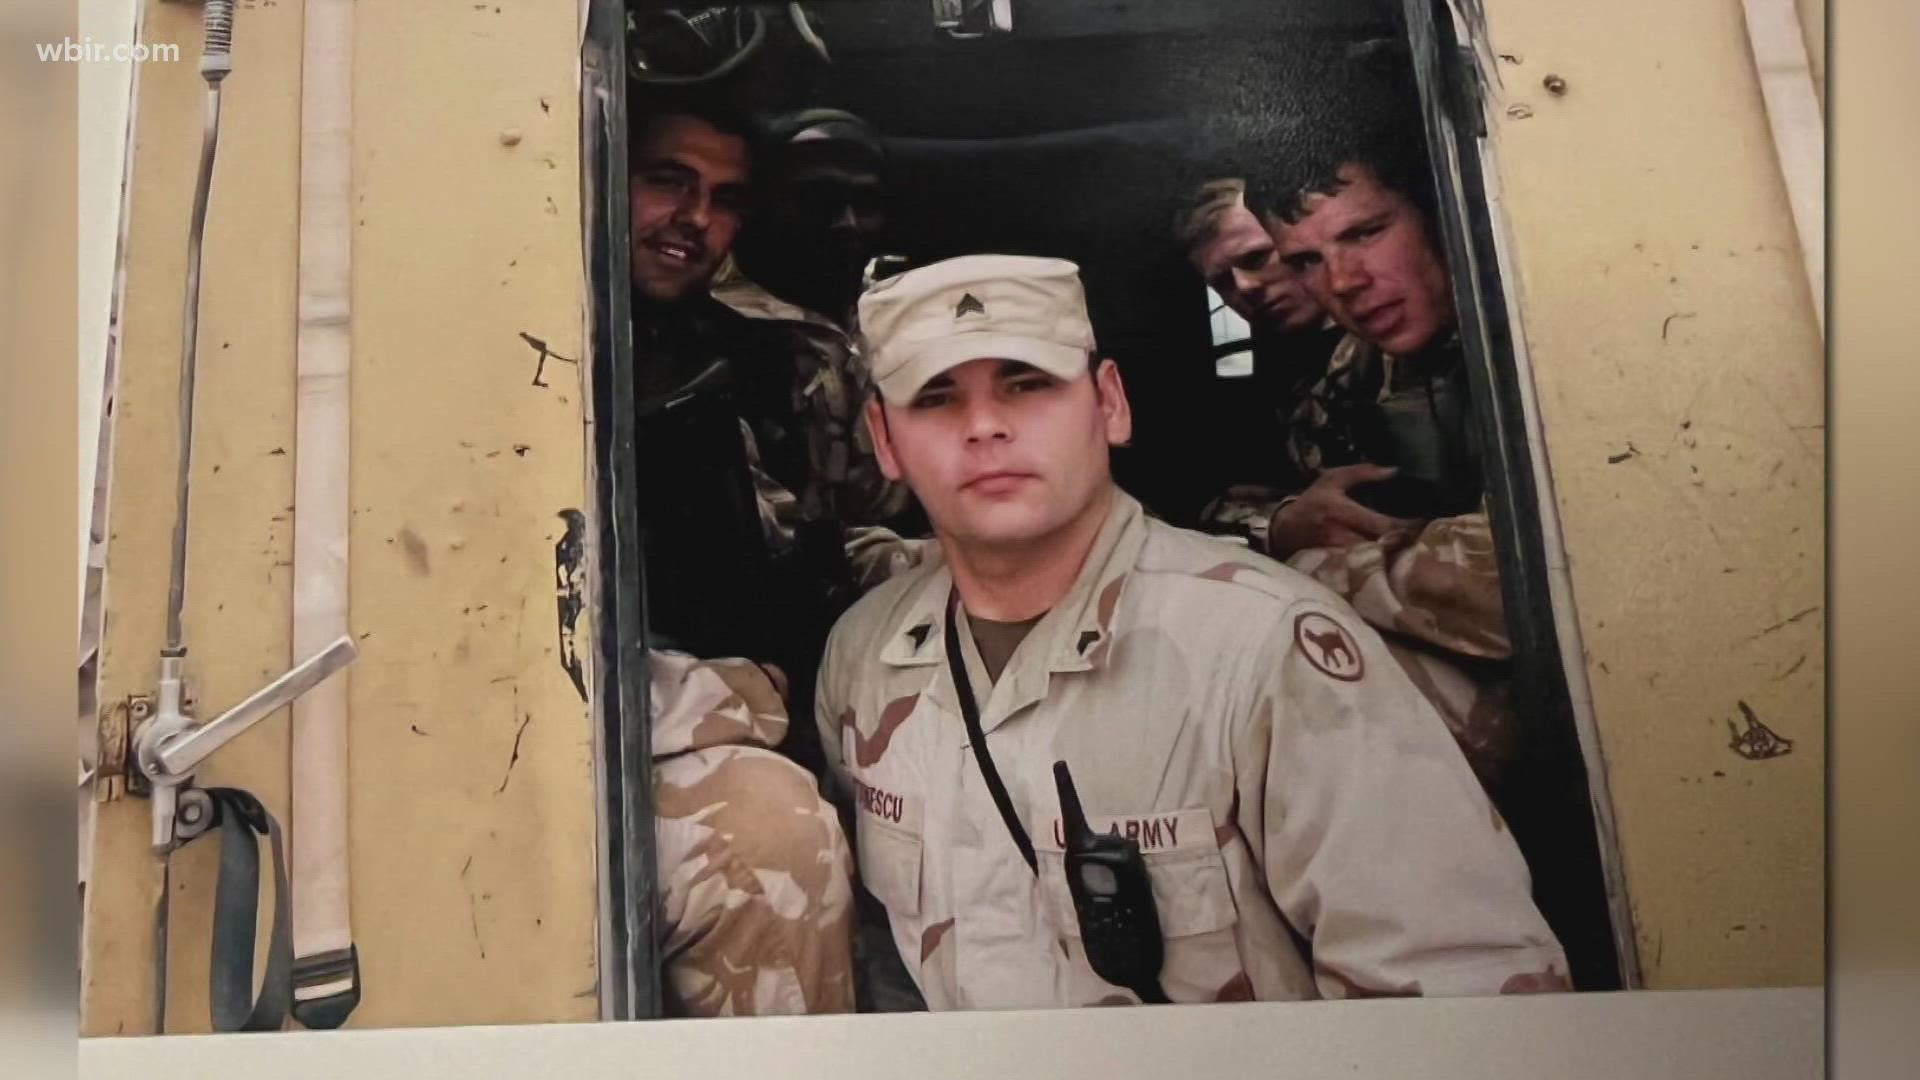 “We can’t ignore this," said a veteran responding to the suicide of a Knoxville soldier.  A 2019 study from the VA shows 17 veterans take their lives every day.